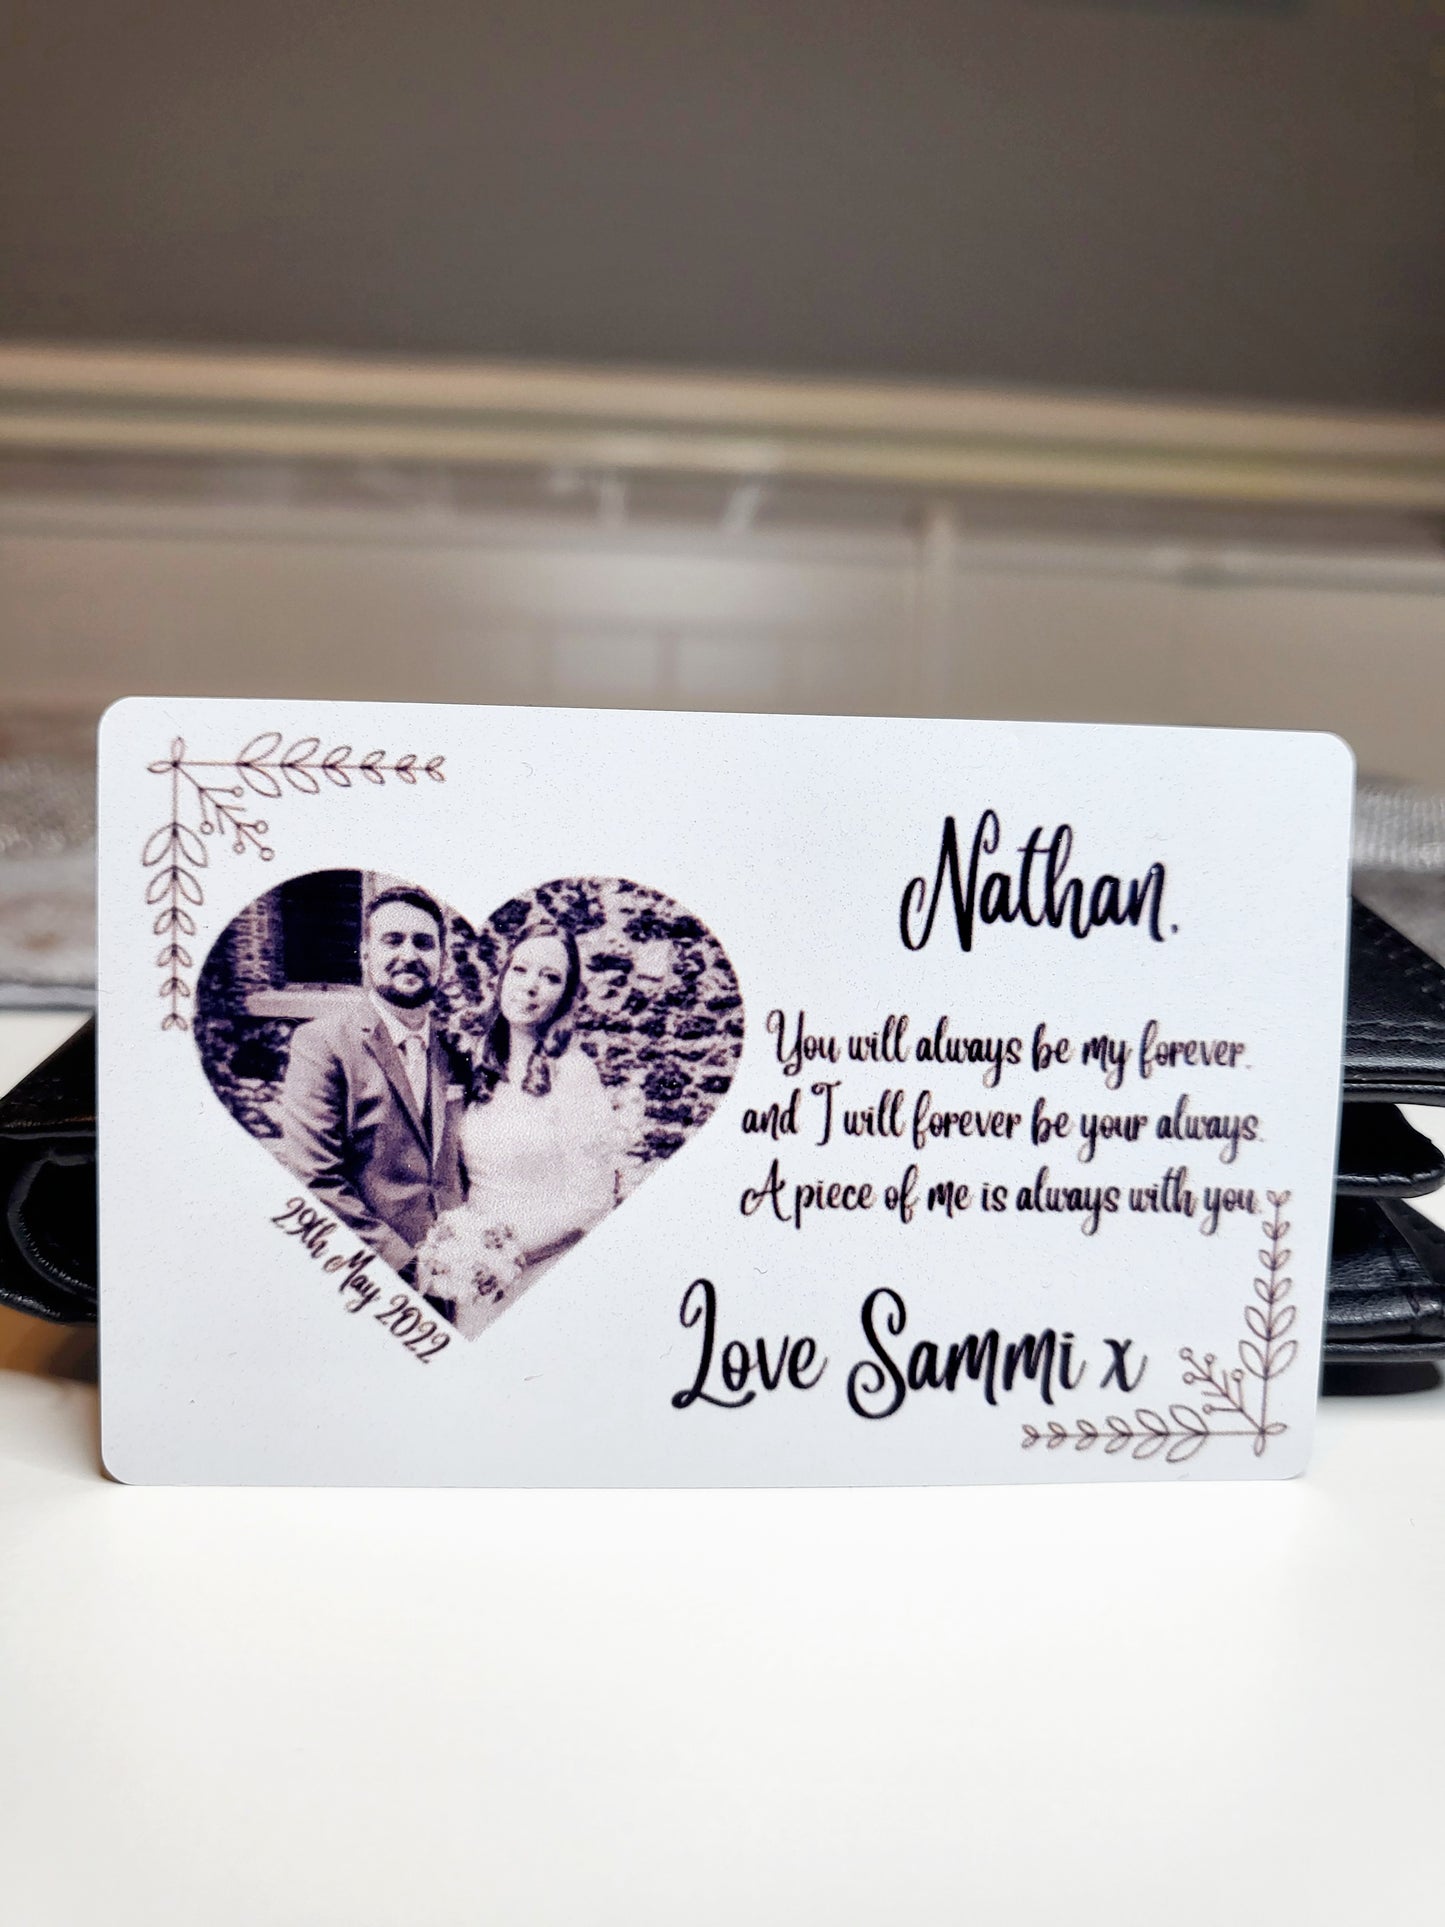 Personalised Wallet/Purse Card - Any Photo & Text